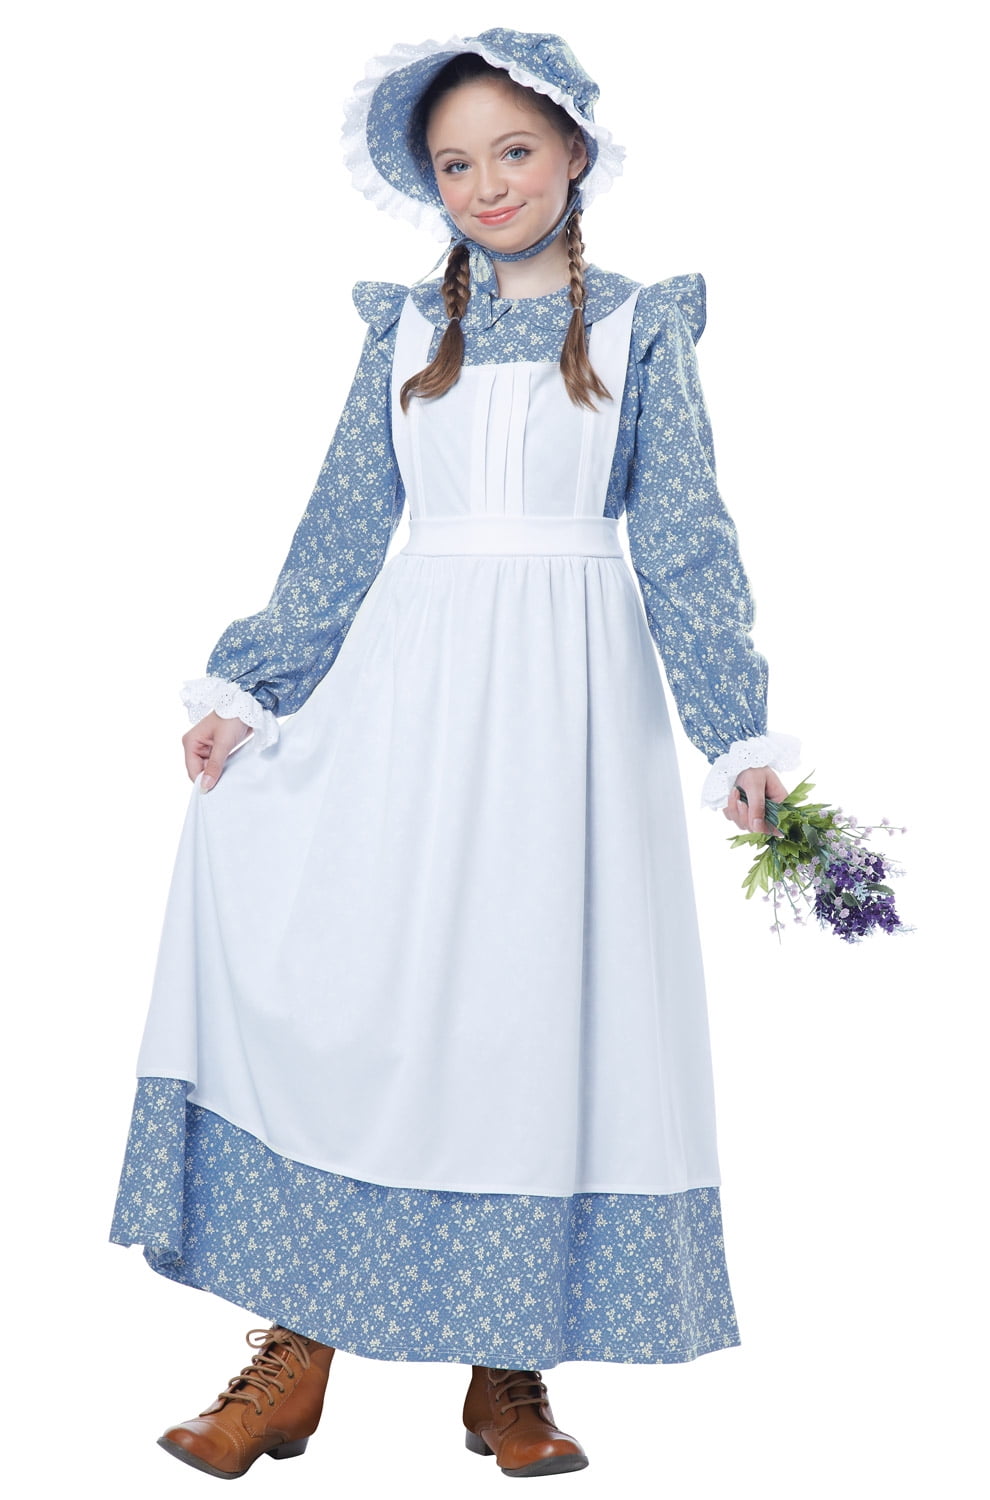 Large Brand New American Colonial Pioneer Girl Child Costume 